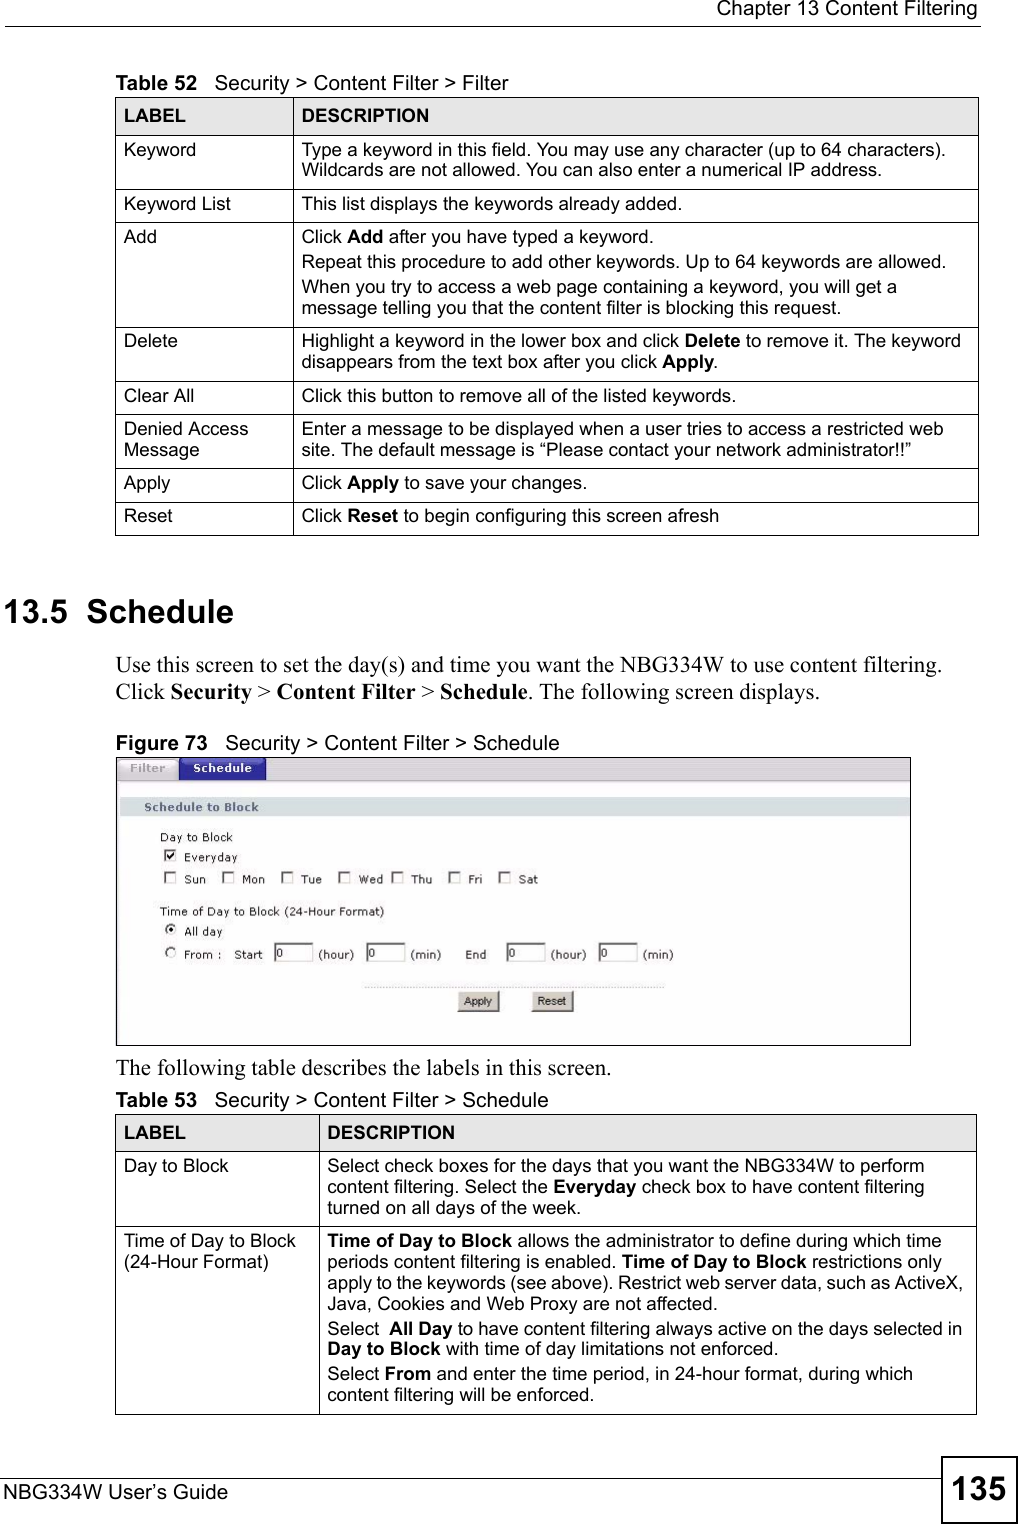  Chapter 13 Content FilteringNBG334W User’s Guide 13513.5  ScheduleUse this screen to set the day(s) and time you want the NBG334W to use content filtering. Click Security &gt; Content Filter &gt; Schedule. The following screen displays.Figure 73   Security &gt; Content Filter &gt; ScheduleThe following table describes the labels in this screen.Keyword Type a keyword in this field. You may use any character (up to 64 characters). Wildcards are not allowed. You can also enter a numerical IP address.Keyword List This list displays the keywords already added. Add  Click Add after you have typed a keyword. Repeat this procedure to add other keywords. Up to 64 keywords are allowed.When you try to access a web page containing a keyword, you will get a message telling you that the content filter is blocking this request.Delete Highlight a keyword in the lower box and click Delete to remove it. The keyword disappears from the text box after you click Apply.Clear All Click this button to remove all of the listed keywords.Denied Access MessageEnter a message to be displayed when a user tries to access a restricted web site. The default message is “Please contact your network administrator!!”Apply Click Apply to save your changes.Reset Click Reset to begin configuring this screen afreshTable 52   Security &gt; Content Filter &gt; FilterLABEL DESCRIPTIONTable 53   Security &gt; Content Filter &gt; ScheduleLABEL DESCRIPTIONDay to Block Select check boxes for the days that you want the NBG334W to perform content filtering. Select the Everyday check box to have content filtering turned on all days of the week.Time of Day to Block (24-Hour Format)Time of Day to Block allows the administrator to define during which time periods content filtering is enabled. Time of Day to Block restrictions only apply to the keywords (see above). Restrict web server data, such as ActiveX, Java, Cookies and Web Proxy are not affected.Select  All Day to have content filtering always active on the days selected in Day to Block with time of day limitations not enforced.Select From and enter the time period, in 24-hour format, during which content filtering will be enforced. 